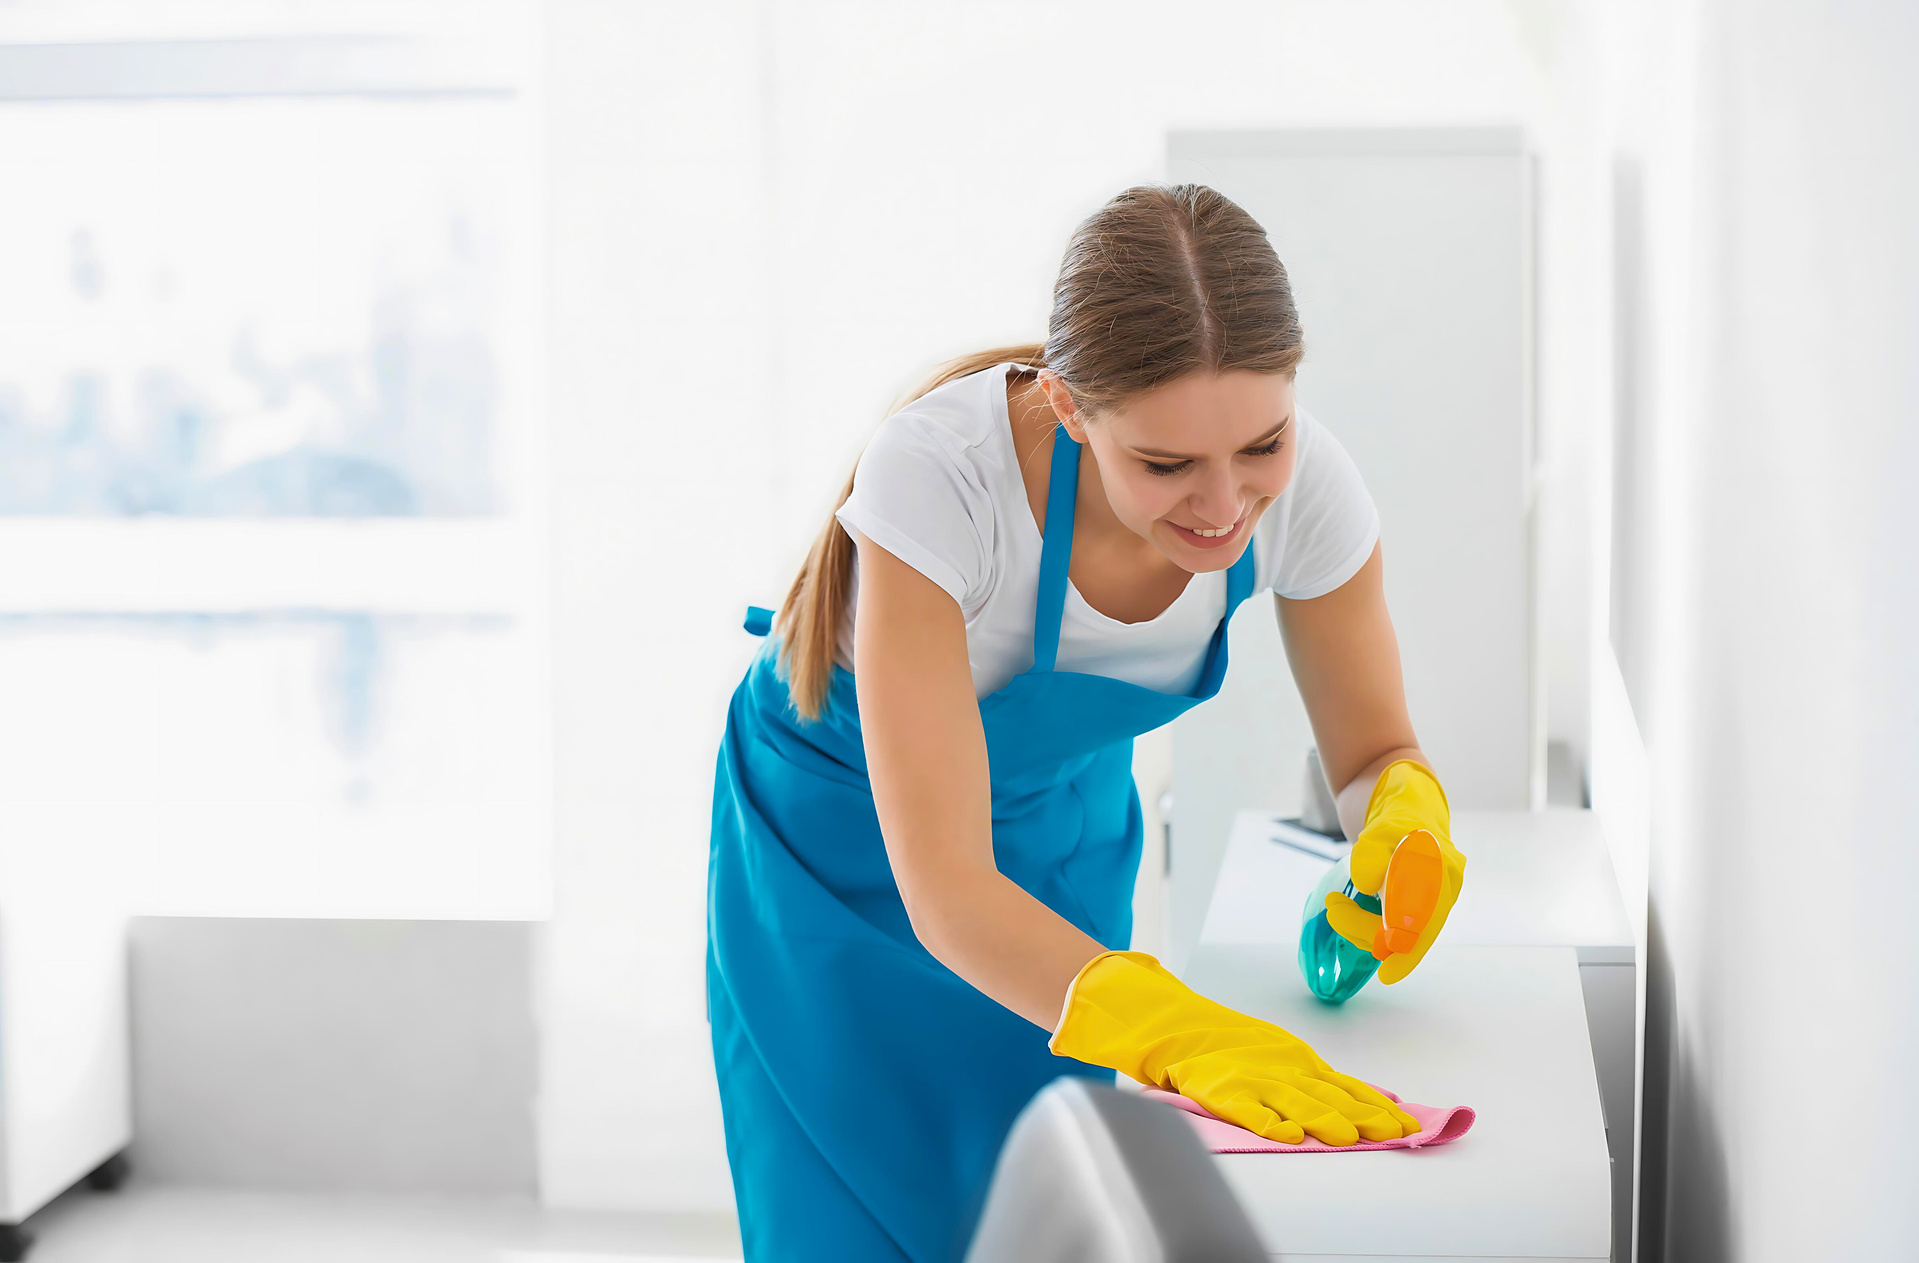 If you’re looking for a cleaning service that cares about your home as much as you do, contact Sevenoaks Cleaning today. Let us show you the difference a professional clean can make.